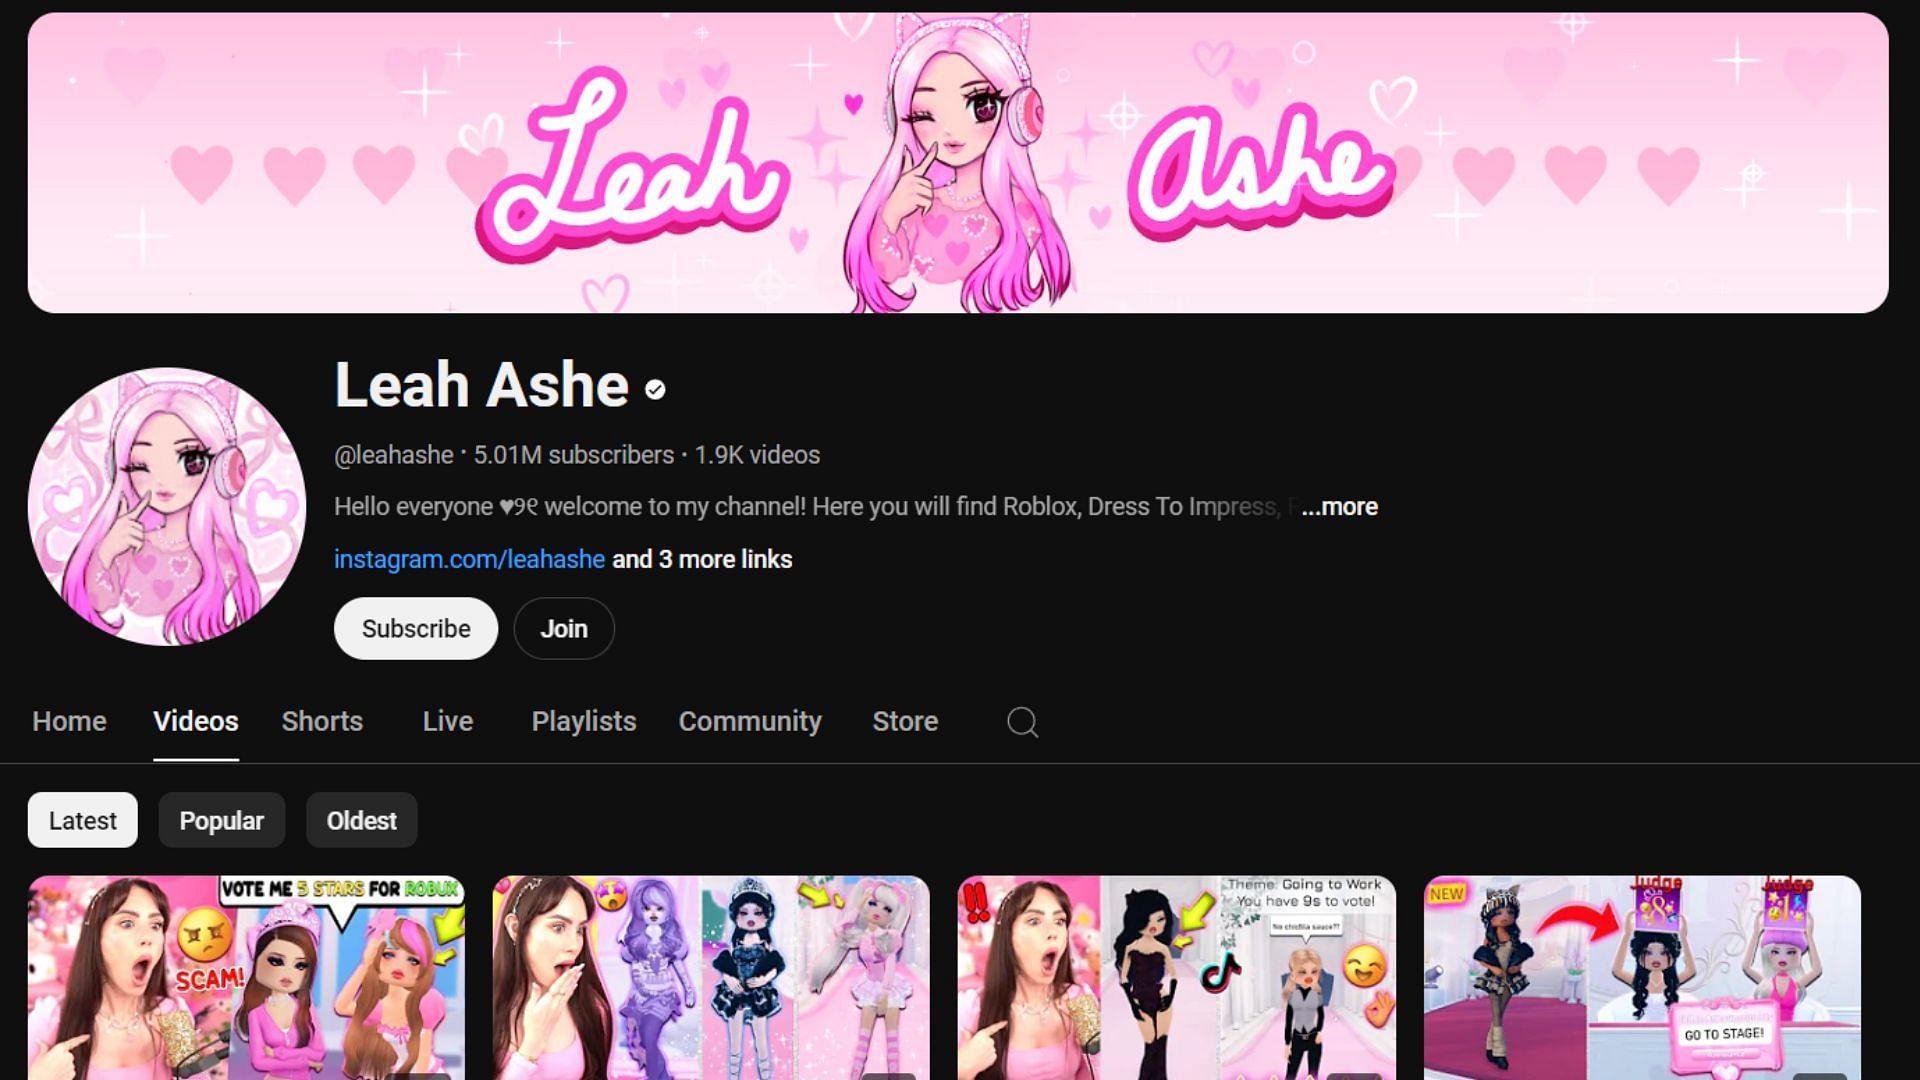 People looking for adorable role-playing content should follow Leah Ashe (Image via YouTube/Leah Ashe)